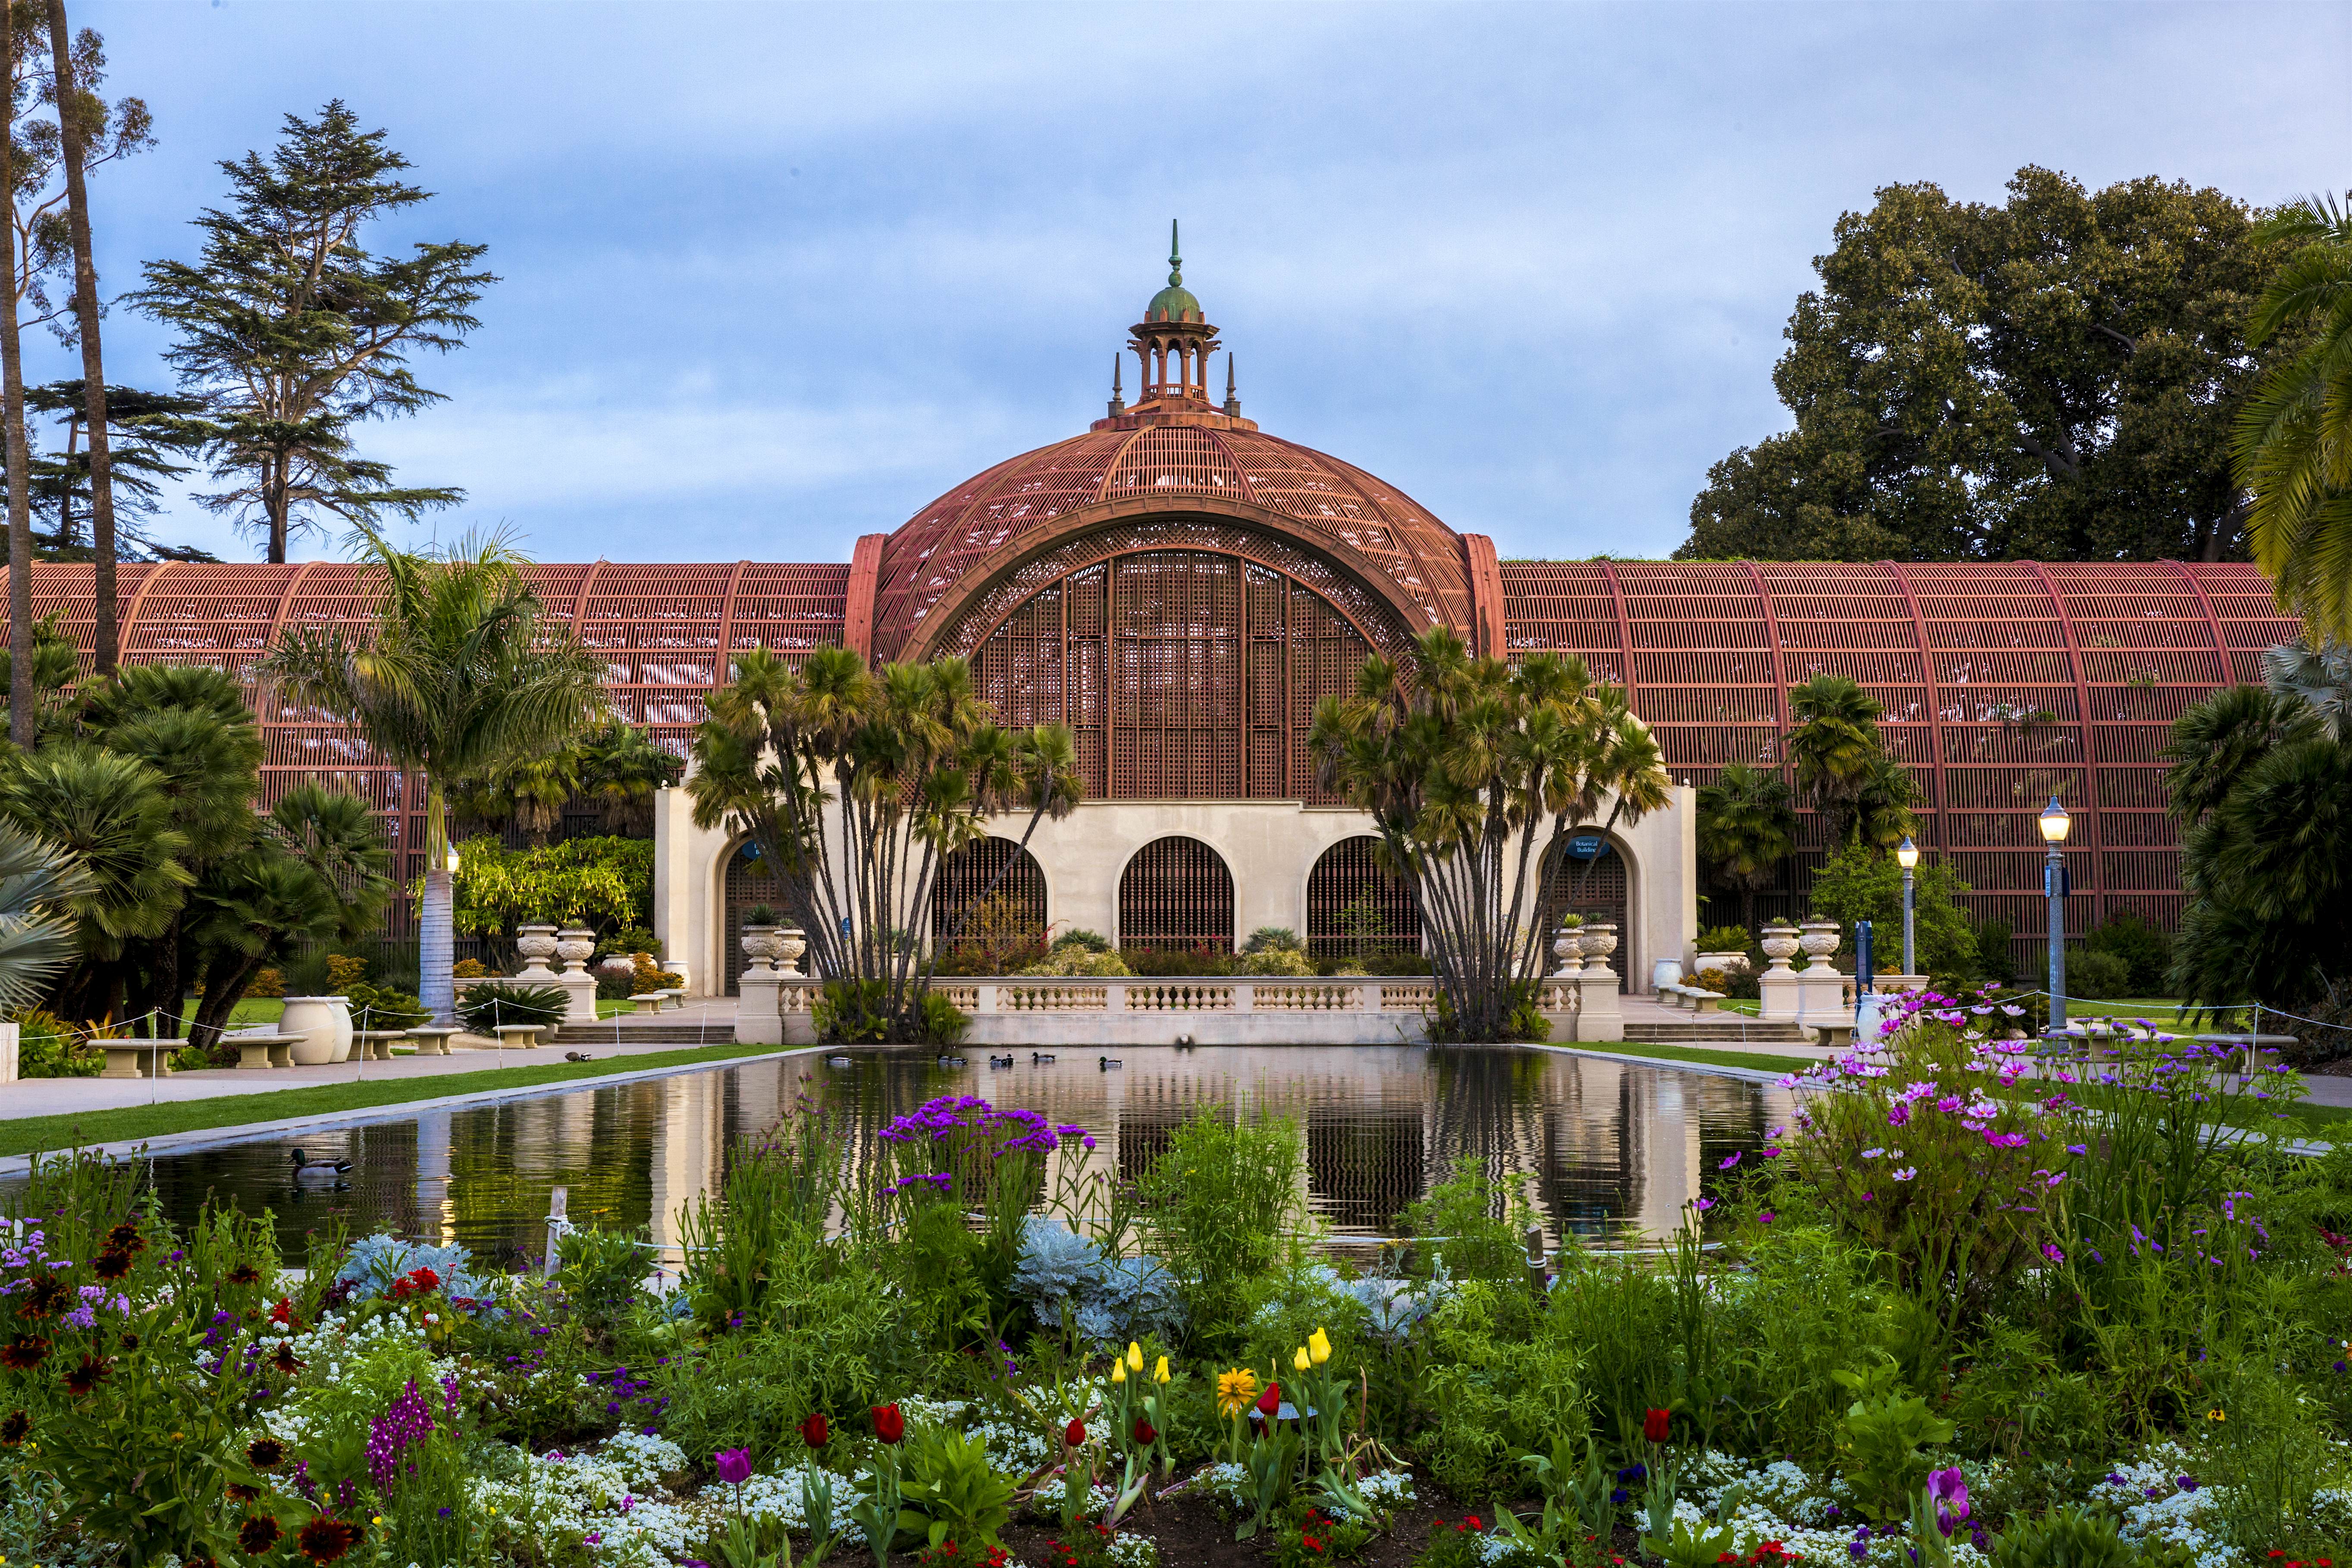 Spend a day at Balboa Park San Diego's center for art, culture and